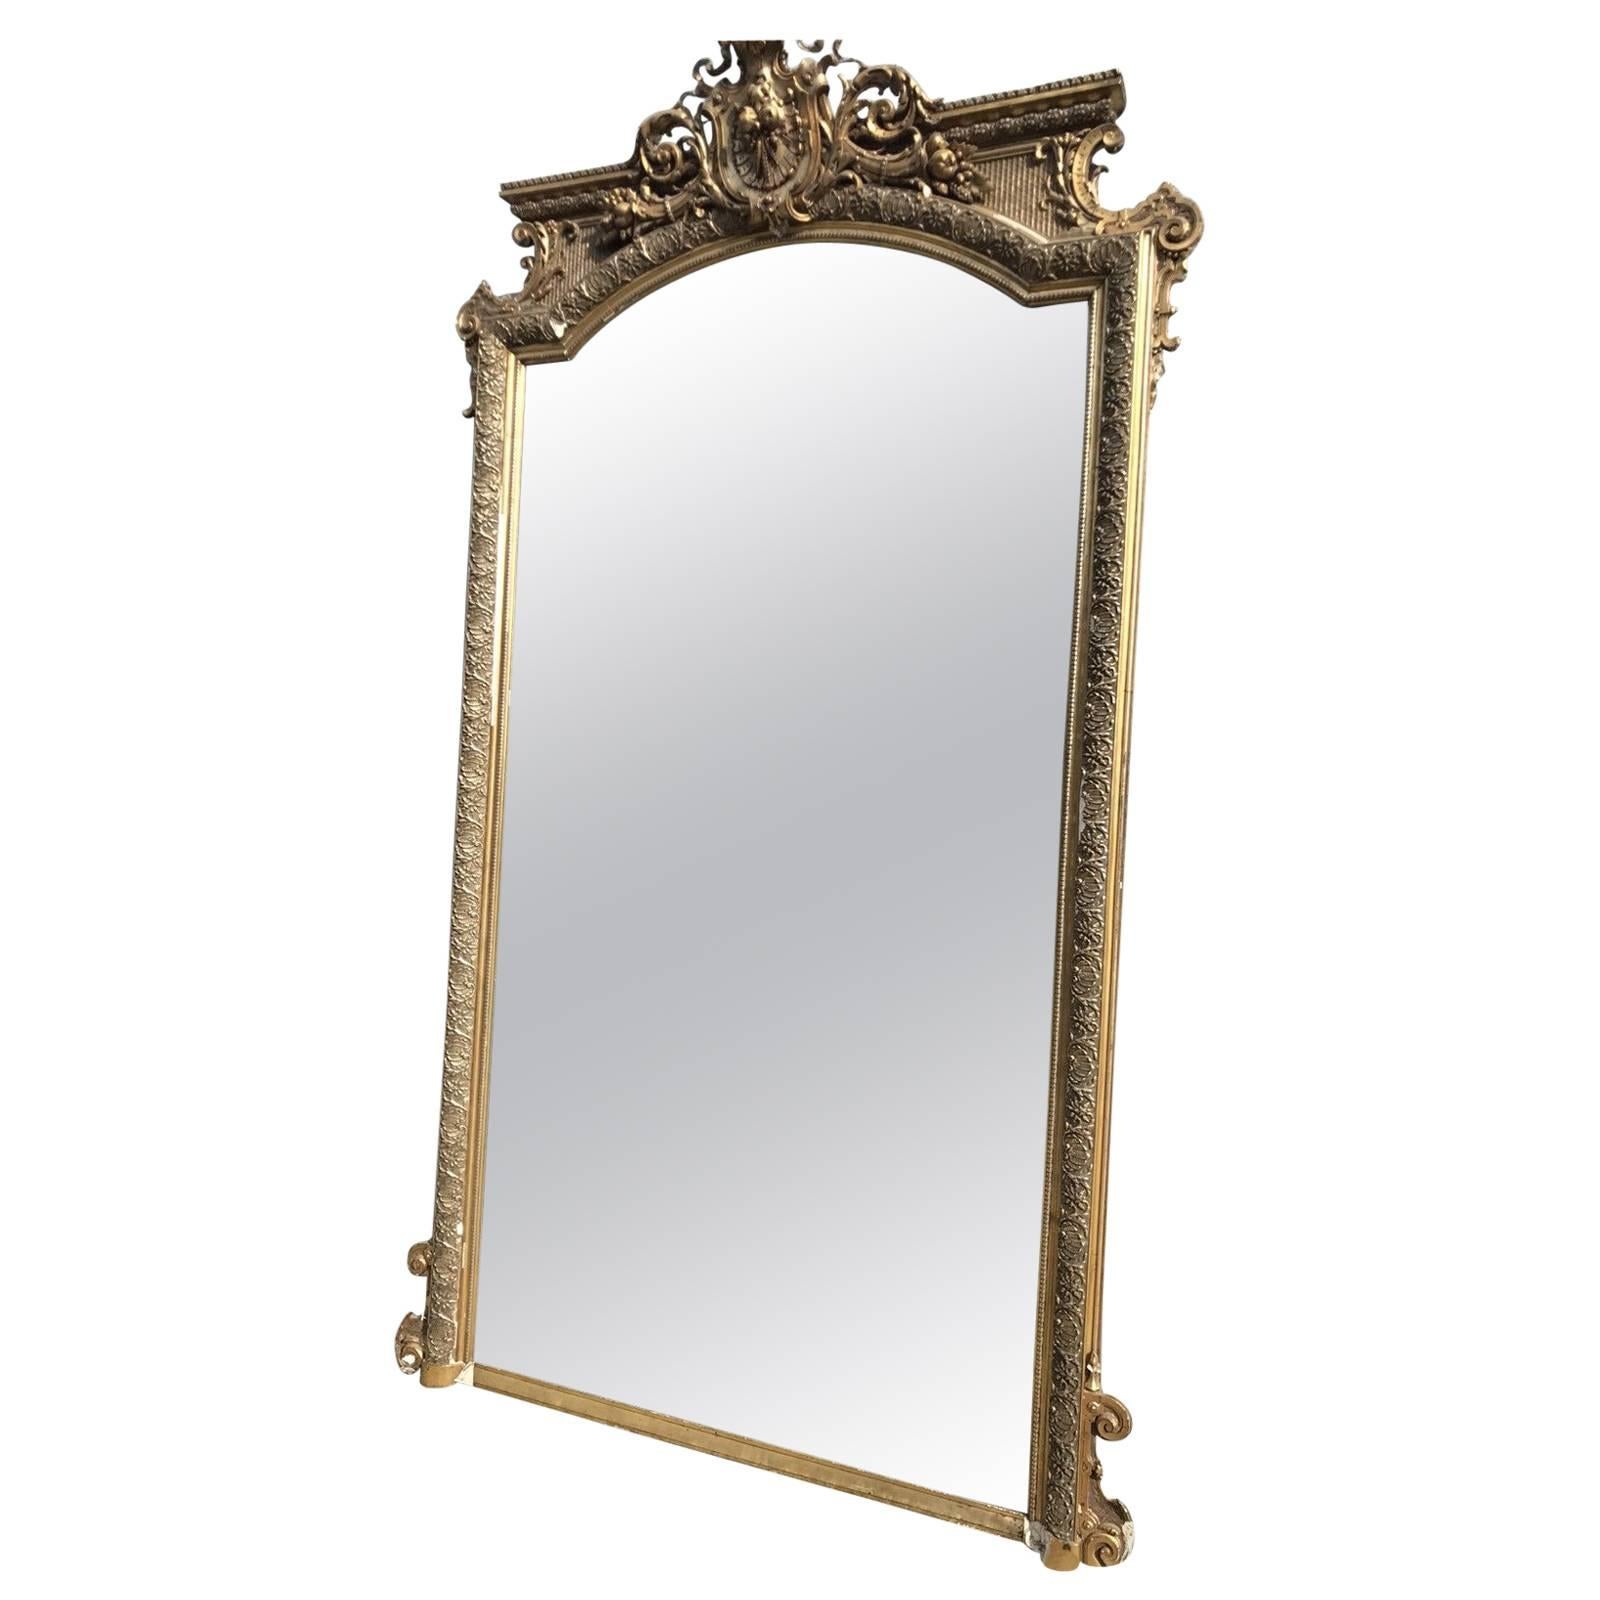 Antique French Mirror, Mega Rare, Early 1800s, Vintage For Sale